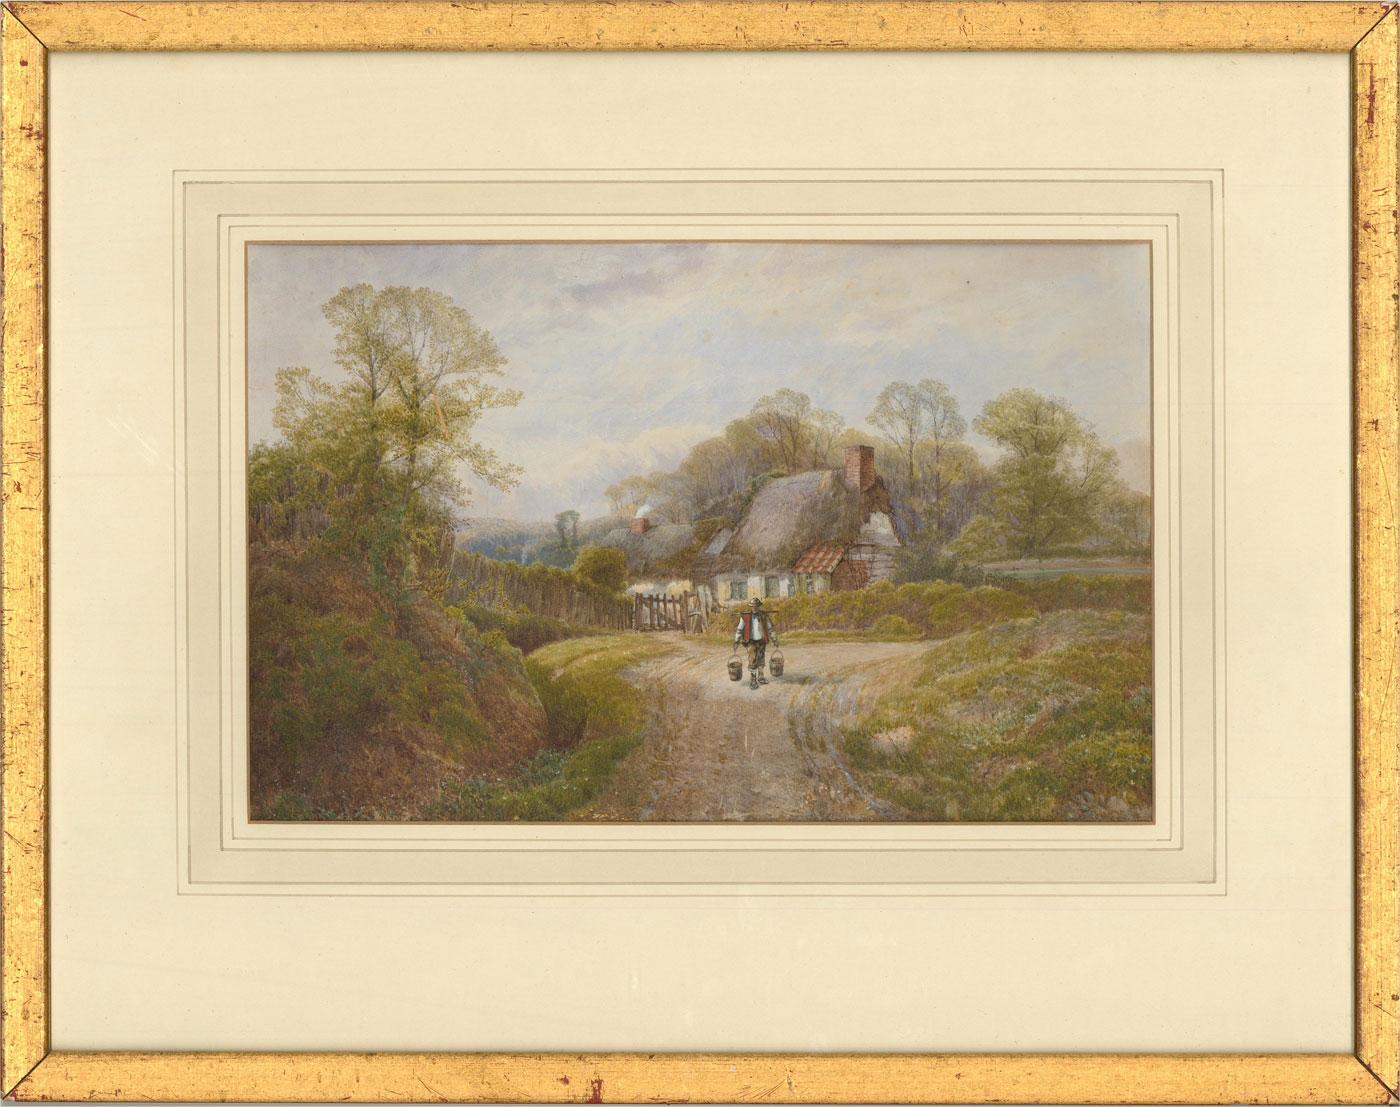 A very fine and delicate watercolour painting with gouache details, depicting a figure on a country lane with a cottage behind. Unsigned. Well-presented in a washline card mount and in a distressed gilt effect frame. On watercolour paper.
